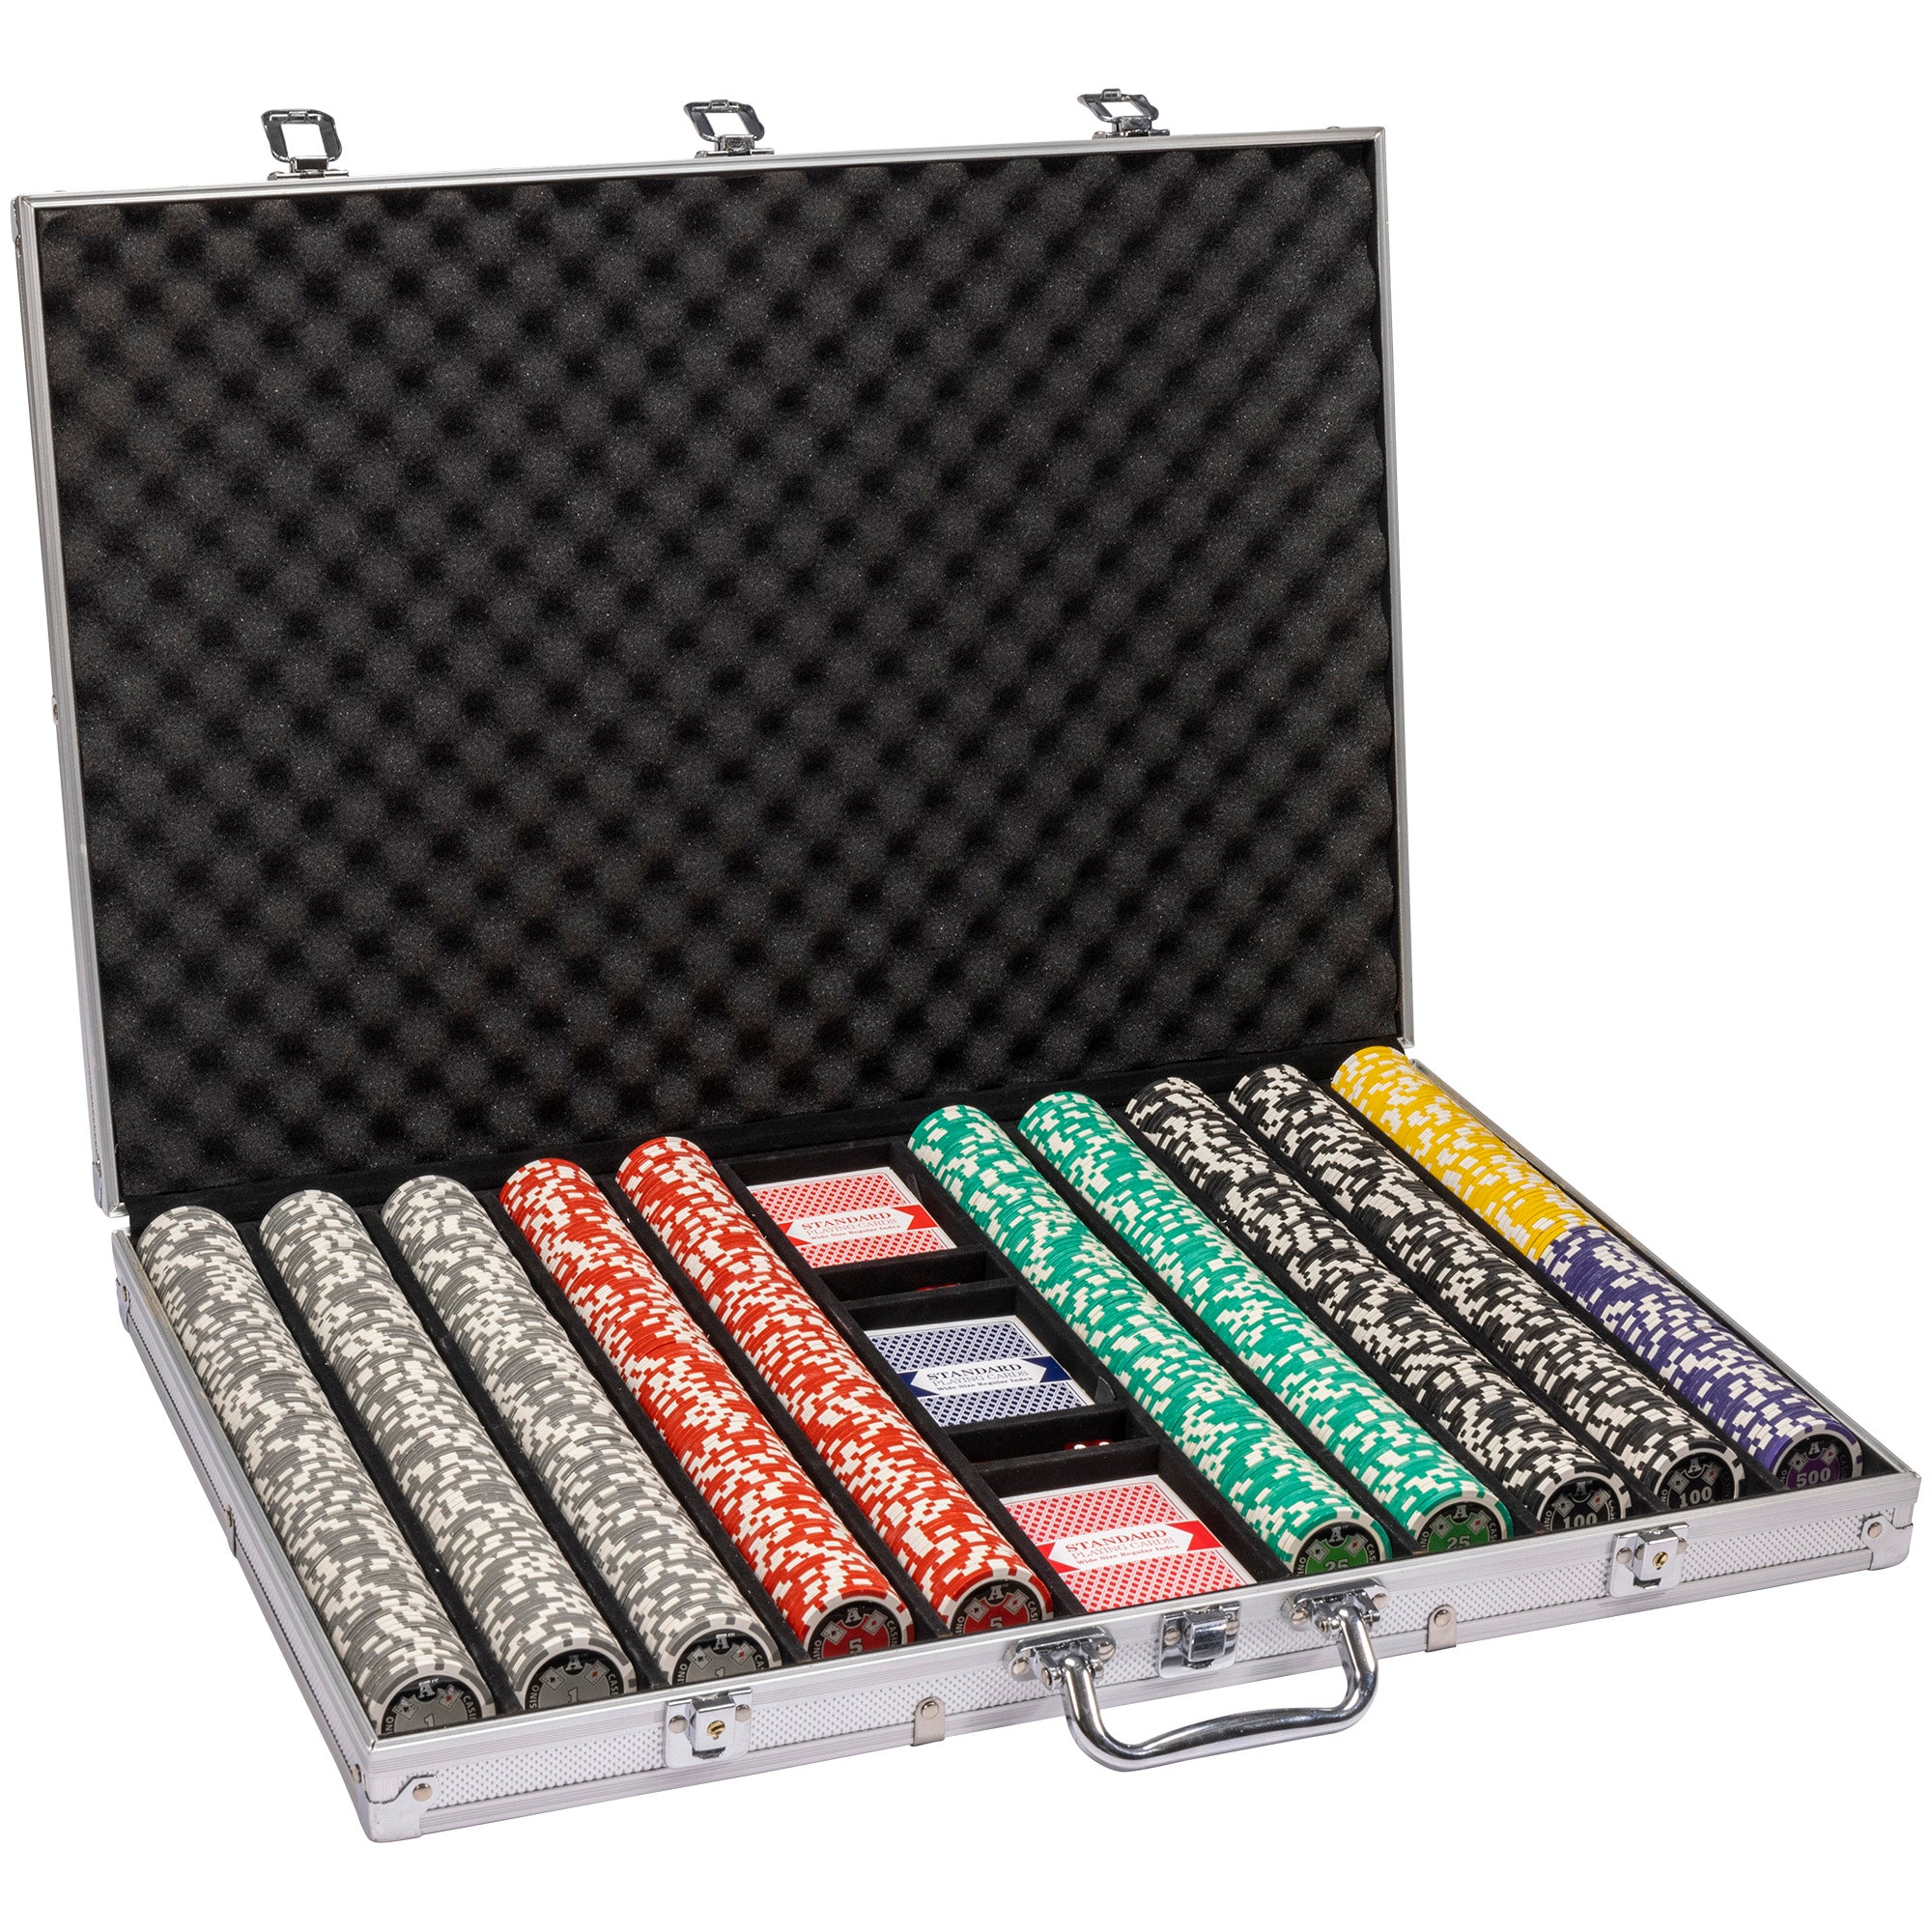 Ace Casino 14-gram Holo Inlay Poker Chip Set in Aluminum Case (1000 Count) - Clay Composite